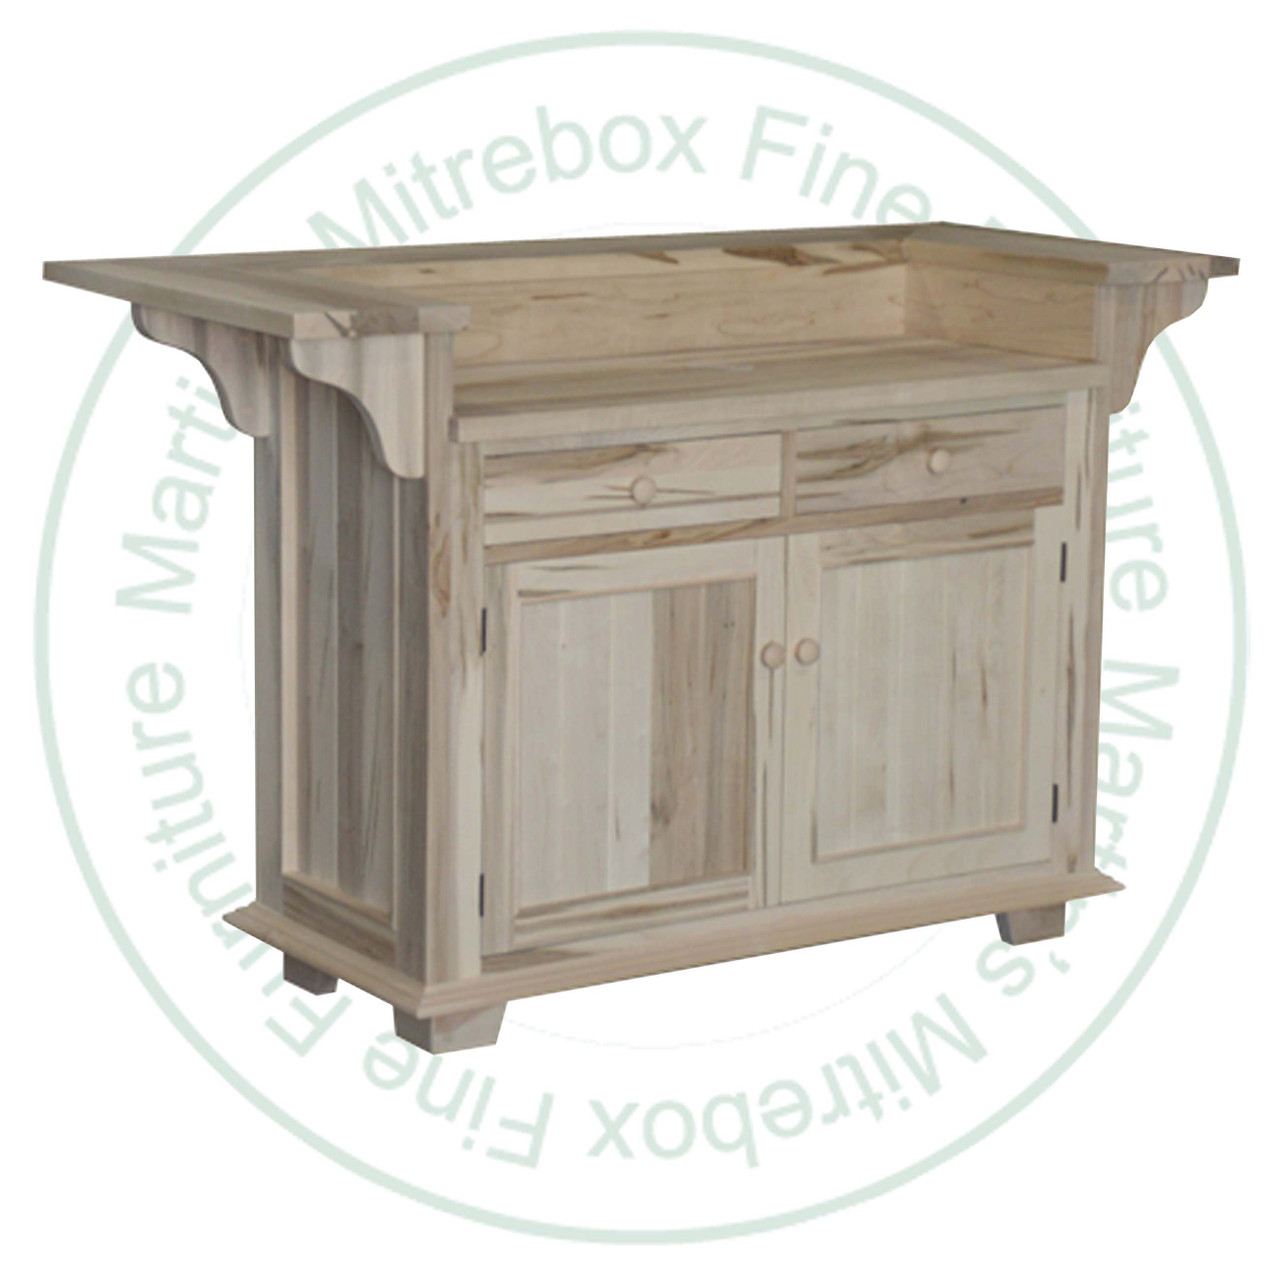 Maple Simplicity Island 30''D x 66''W x 36''H With 2 Drawers And 2 Doors ( With Feet )